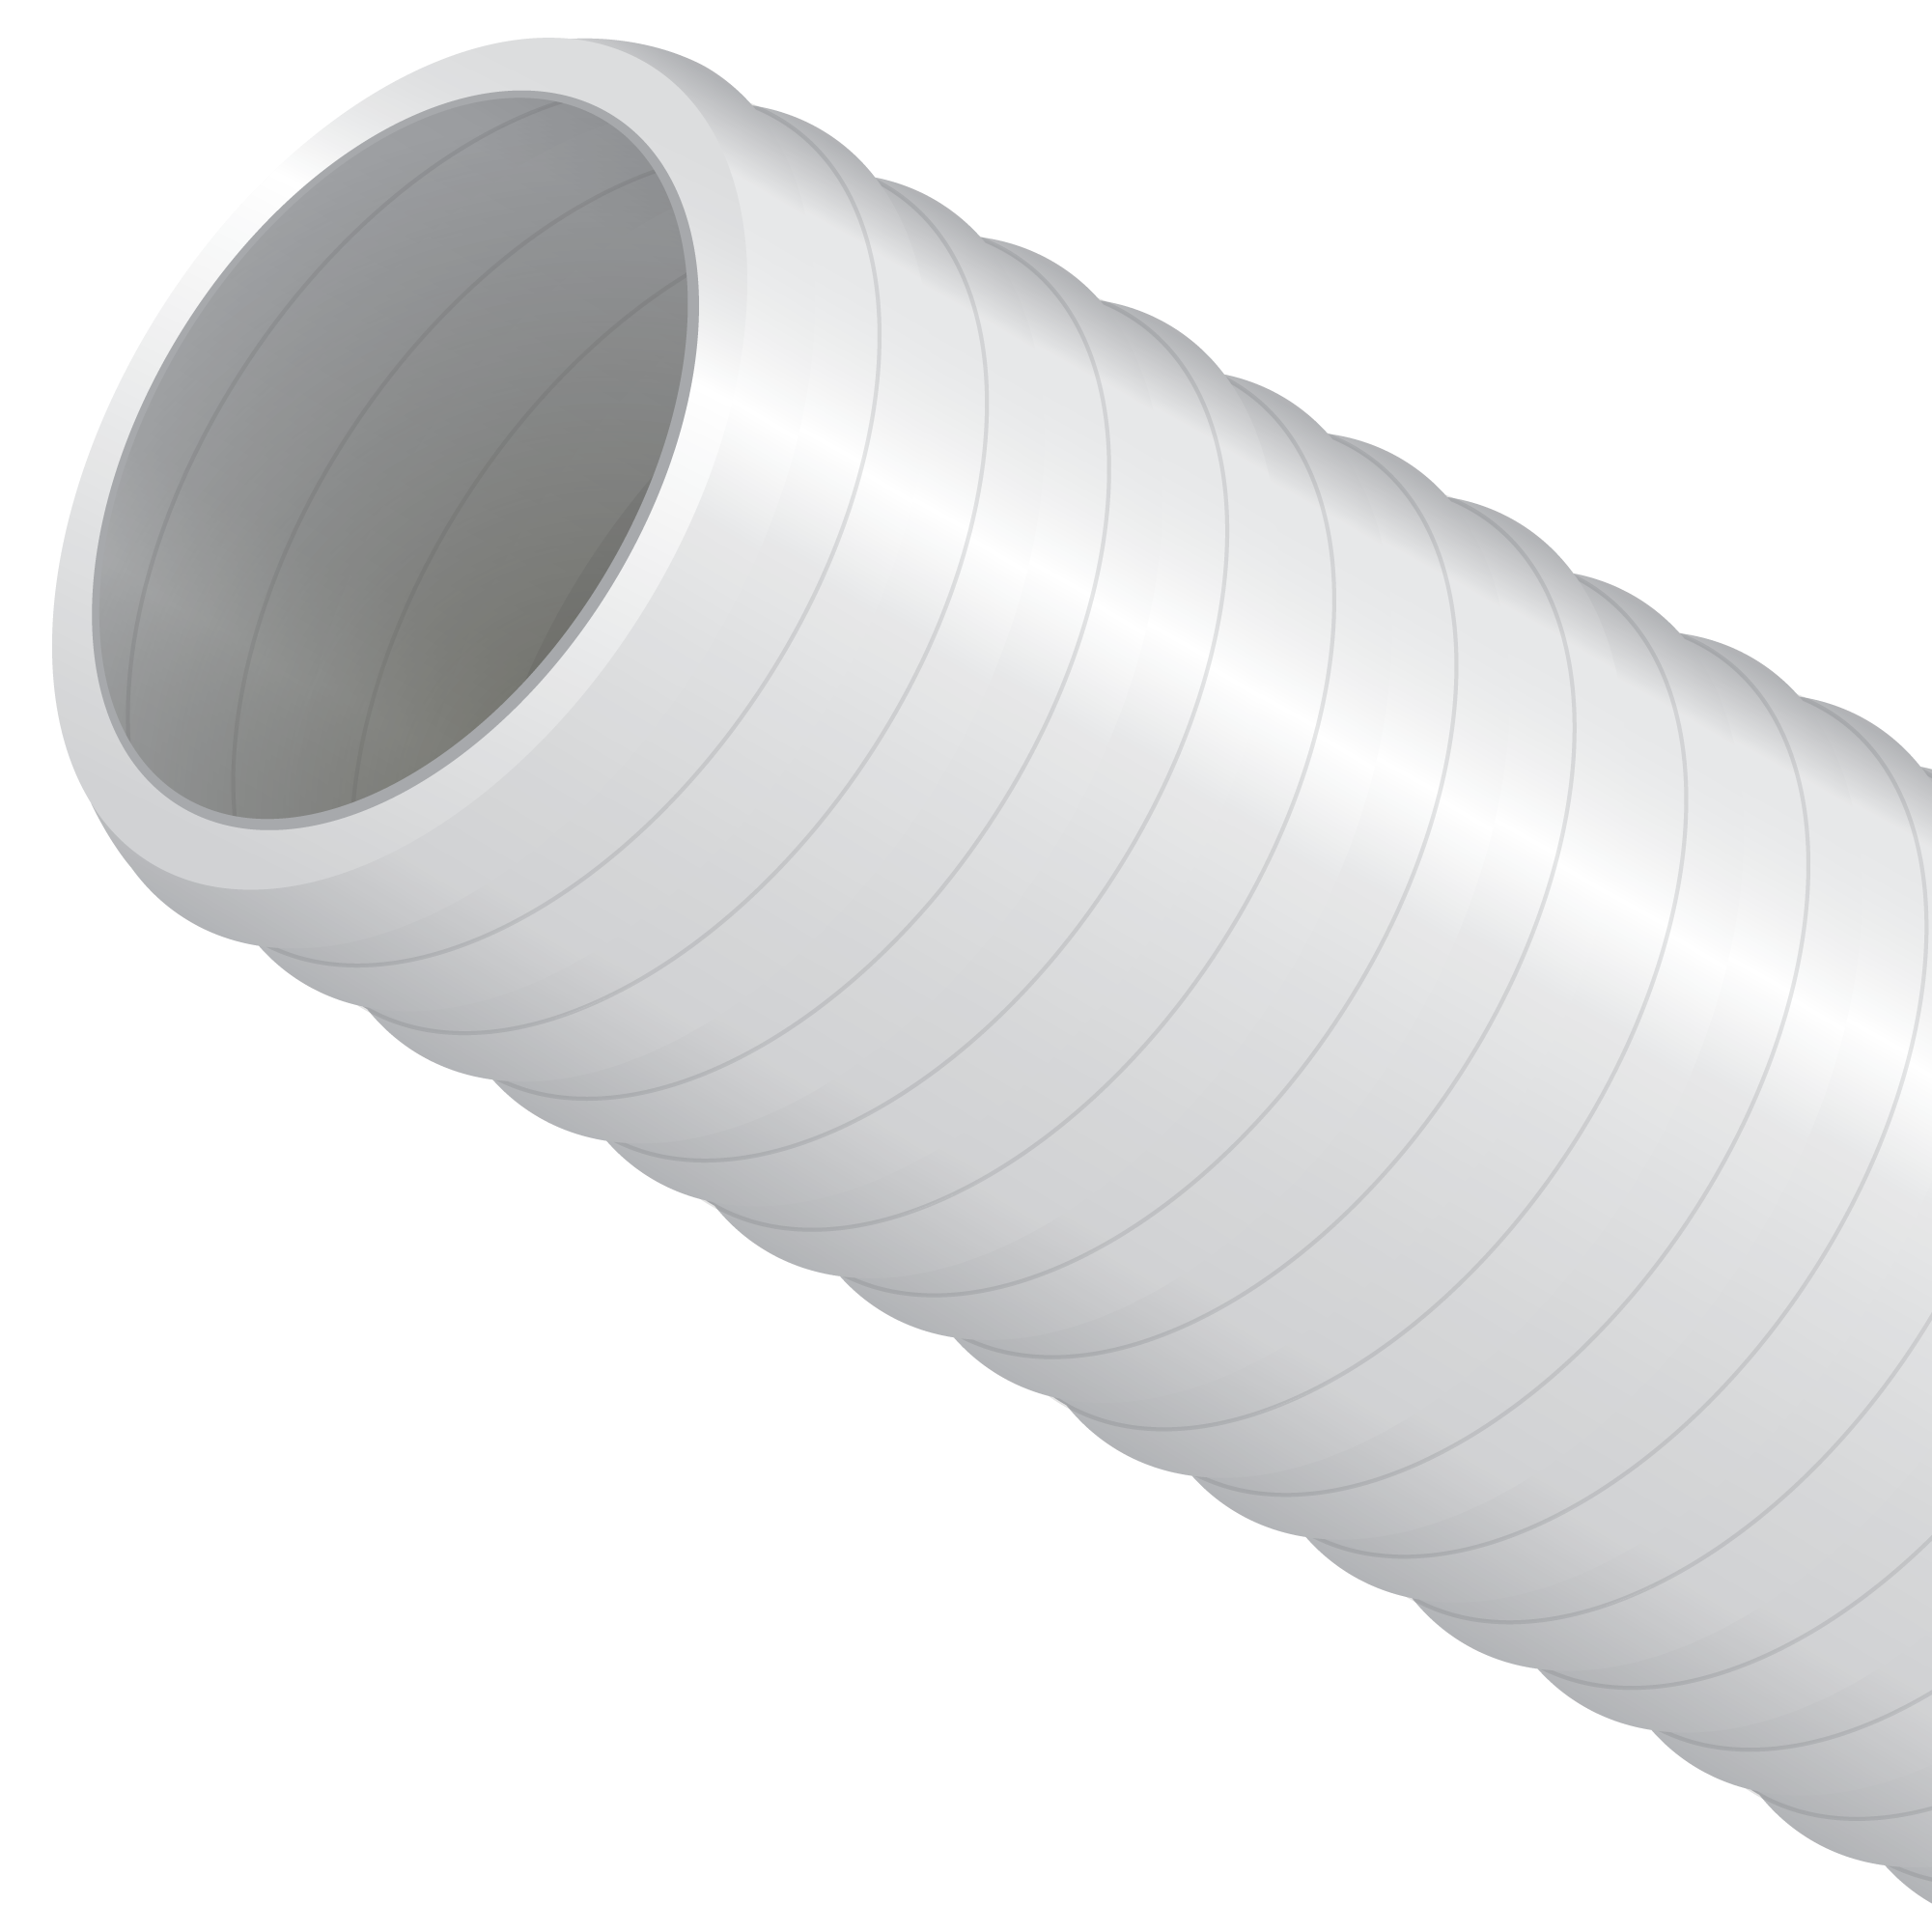 UL Flex Duct is a flexible PVC duct that eliminates the need for special preformed bends. Sizes 1/2" - 4" are UL listed, UV resistant, and offer excellent cable protection from ground line to meter/service box